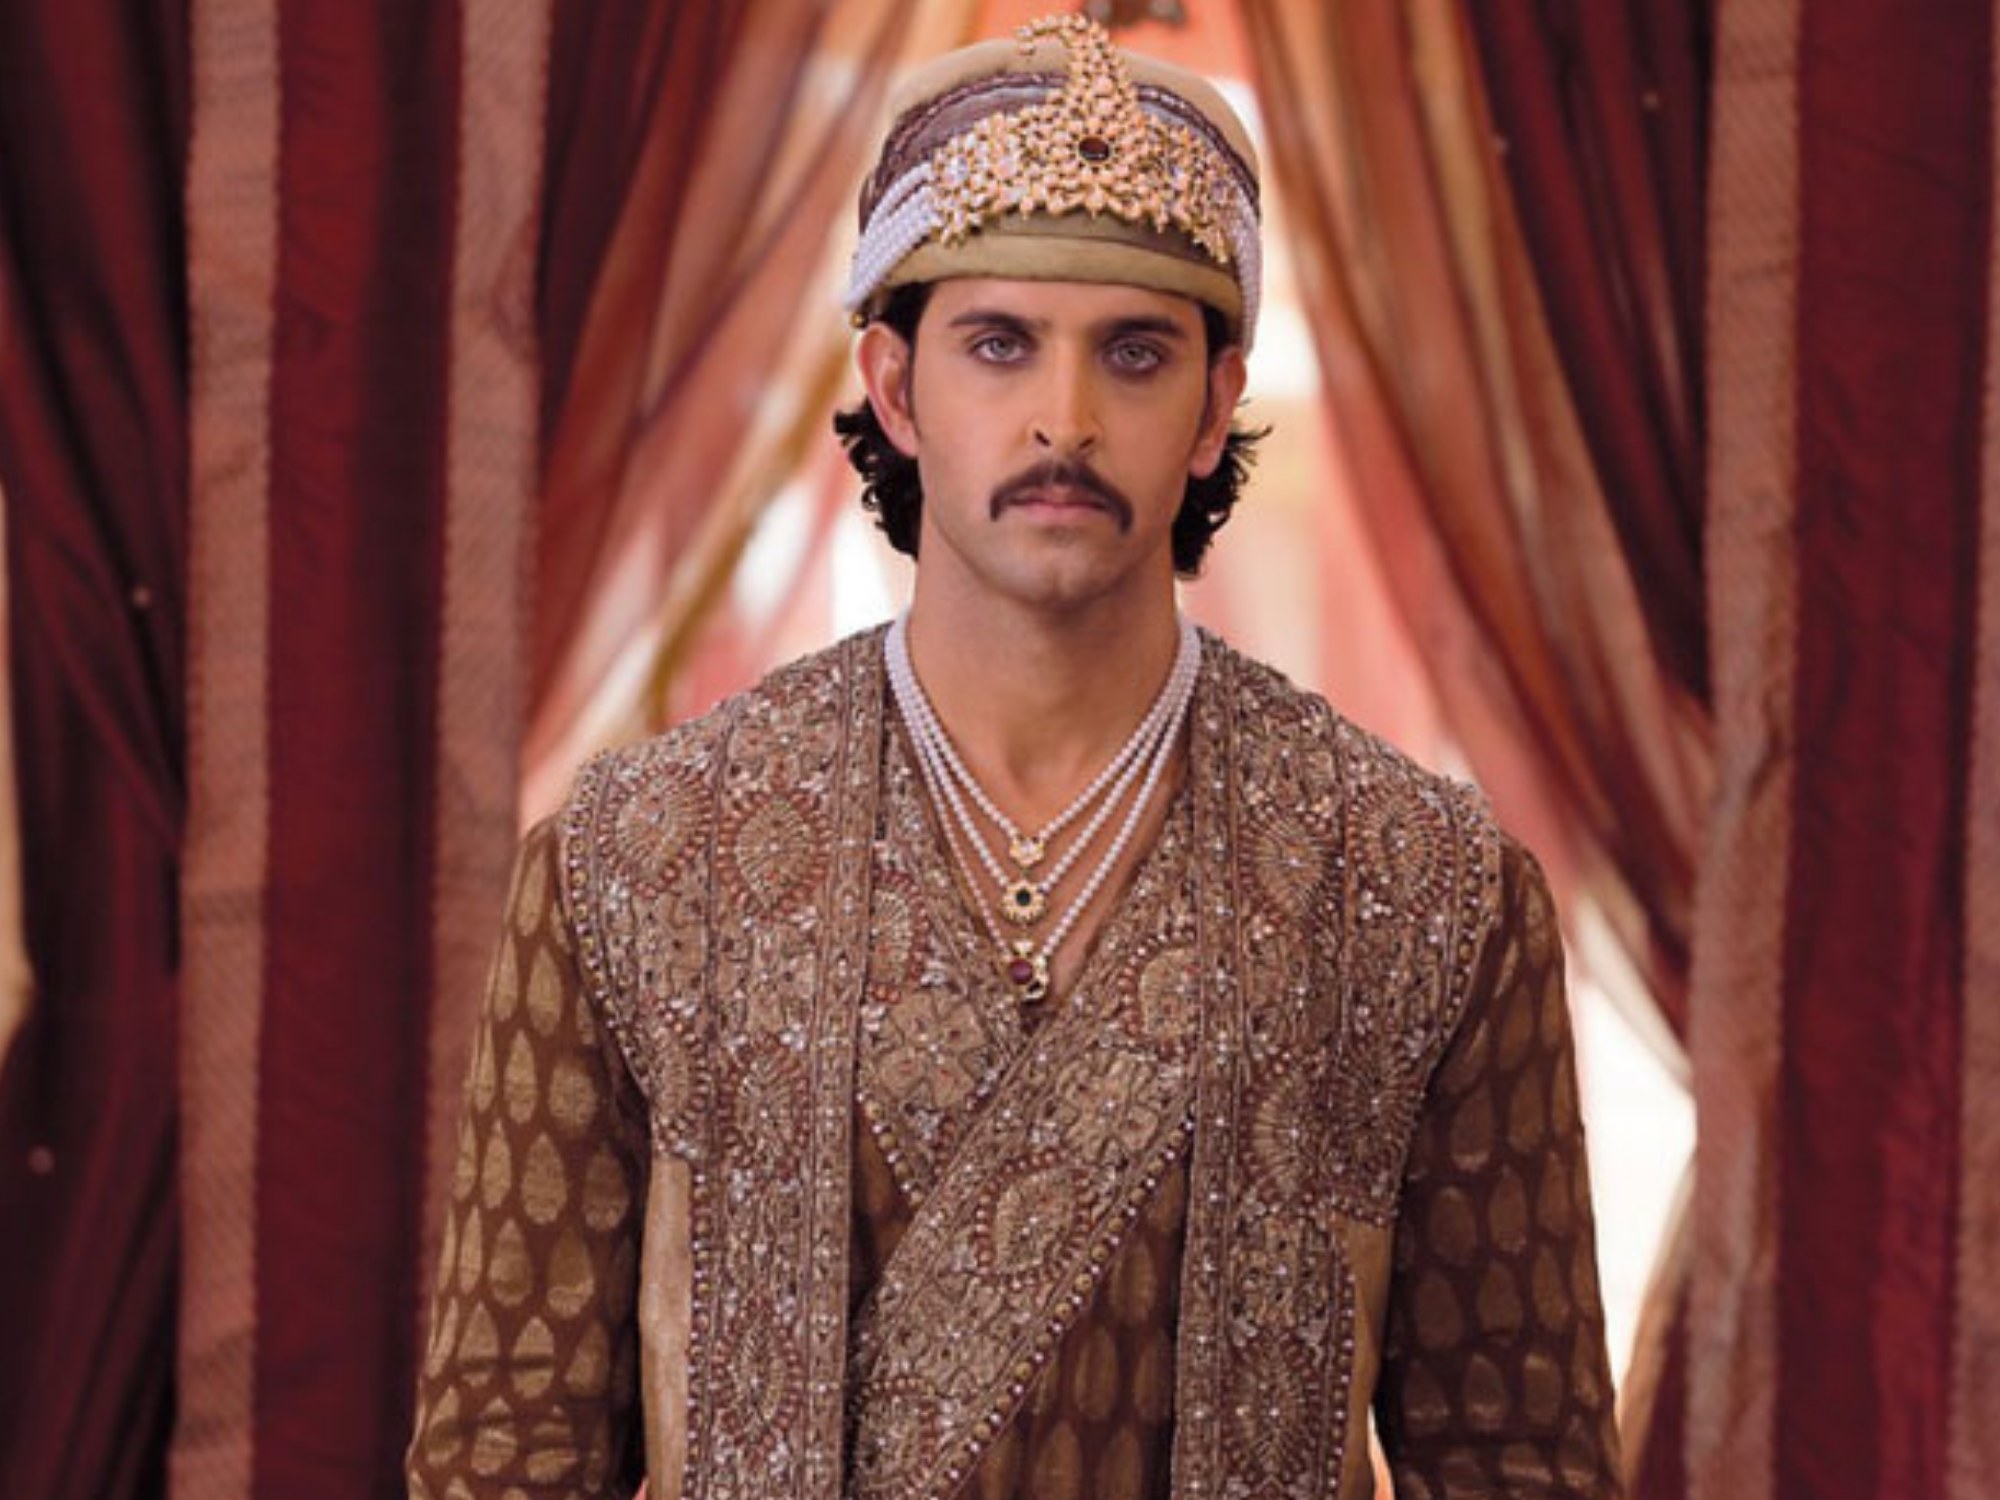 Bollywood actor Hritik Roshan dressed in traditional attire with a turban and jewellery for his character as &#x27;Akbar&#x27; in the movie Jodha Akbar.